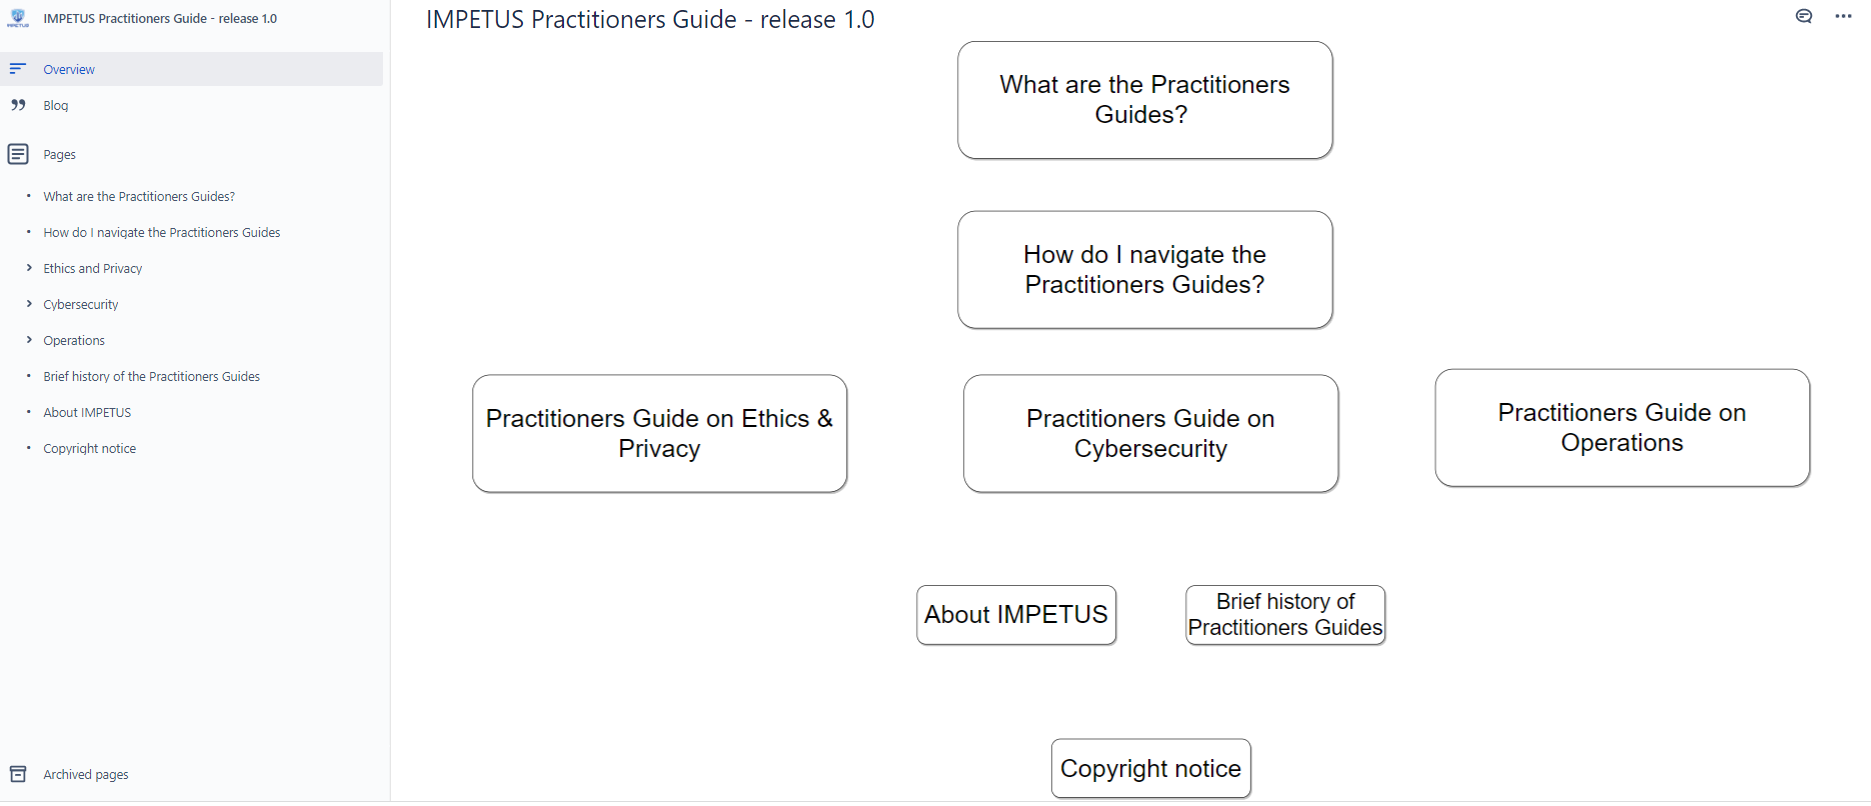 IMPETUS Practitioners Guides Release 1.1